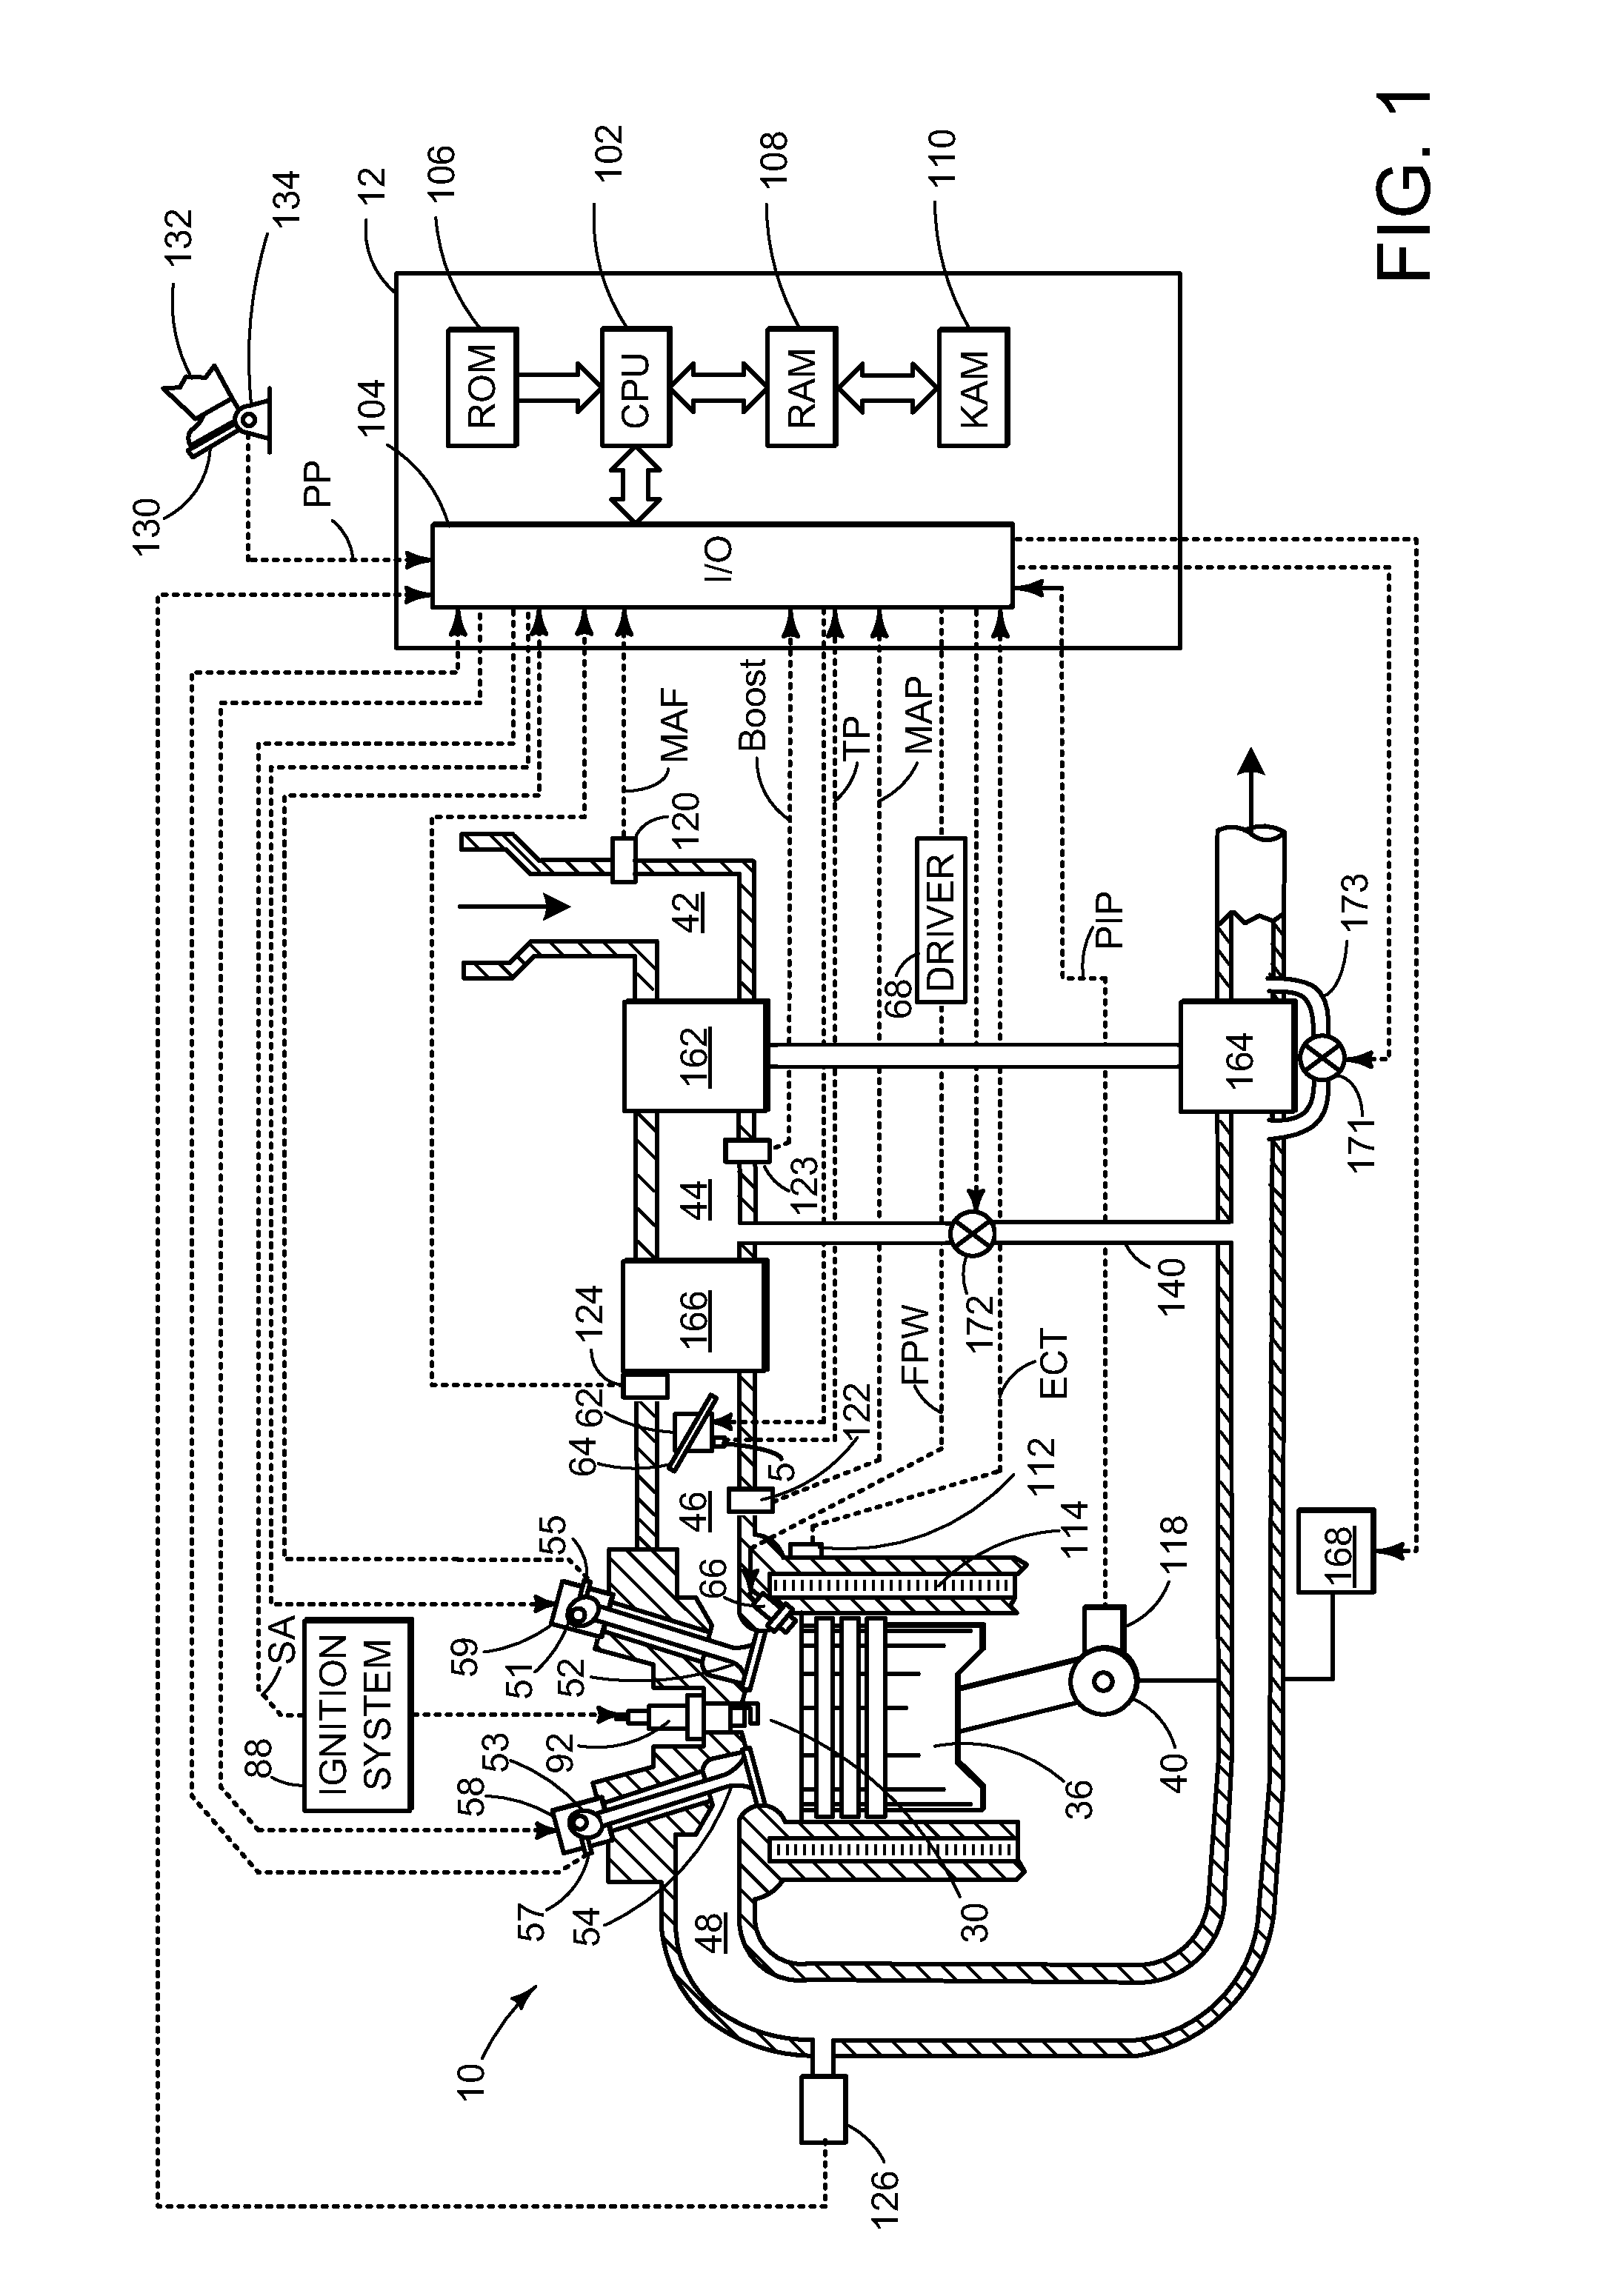 Methods for reducing raw particulate engine emissions